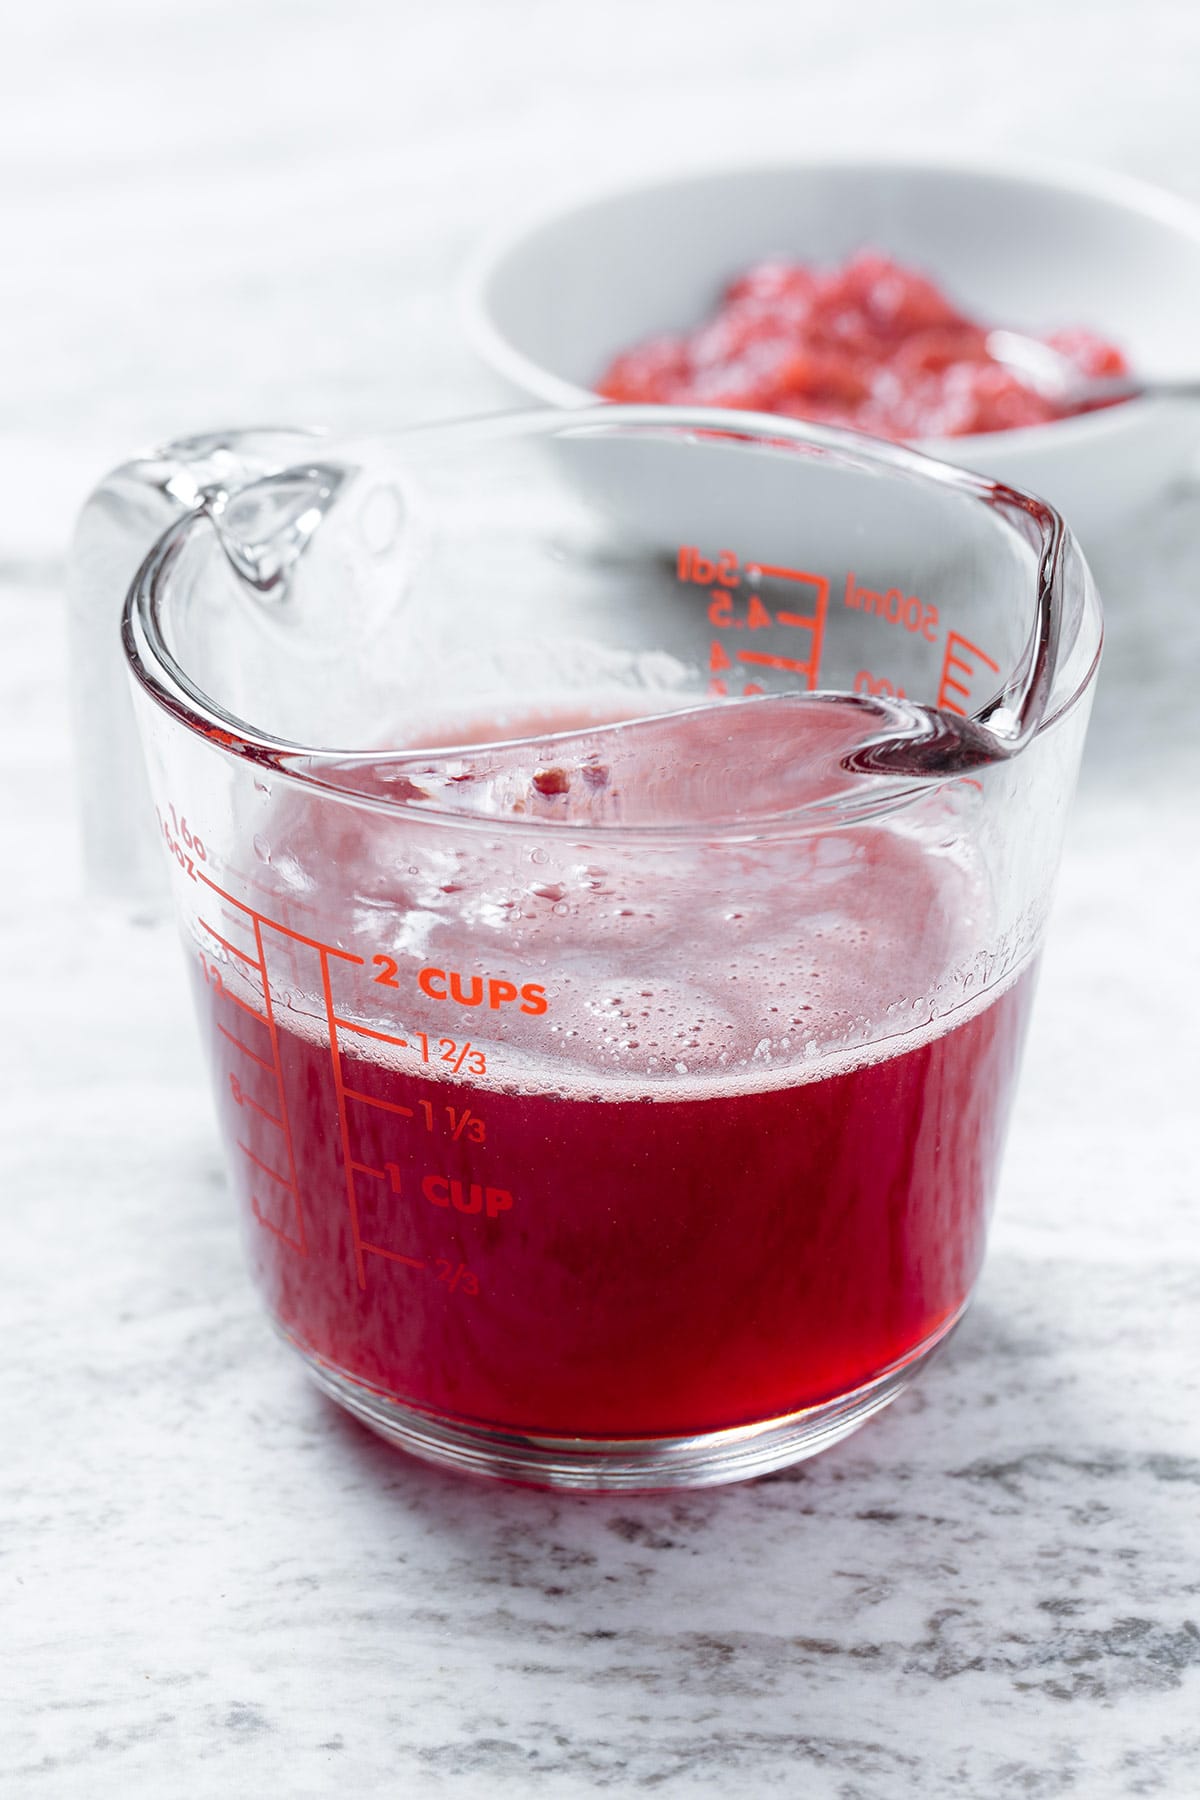 Strained strawberry syrup in a large glass measuring cup on a stone background.